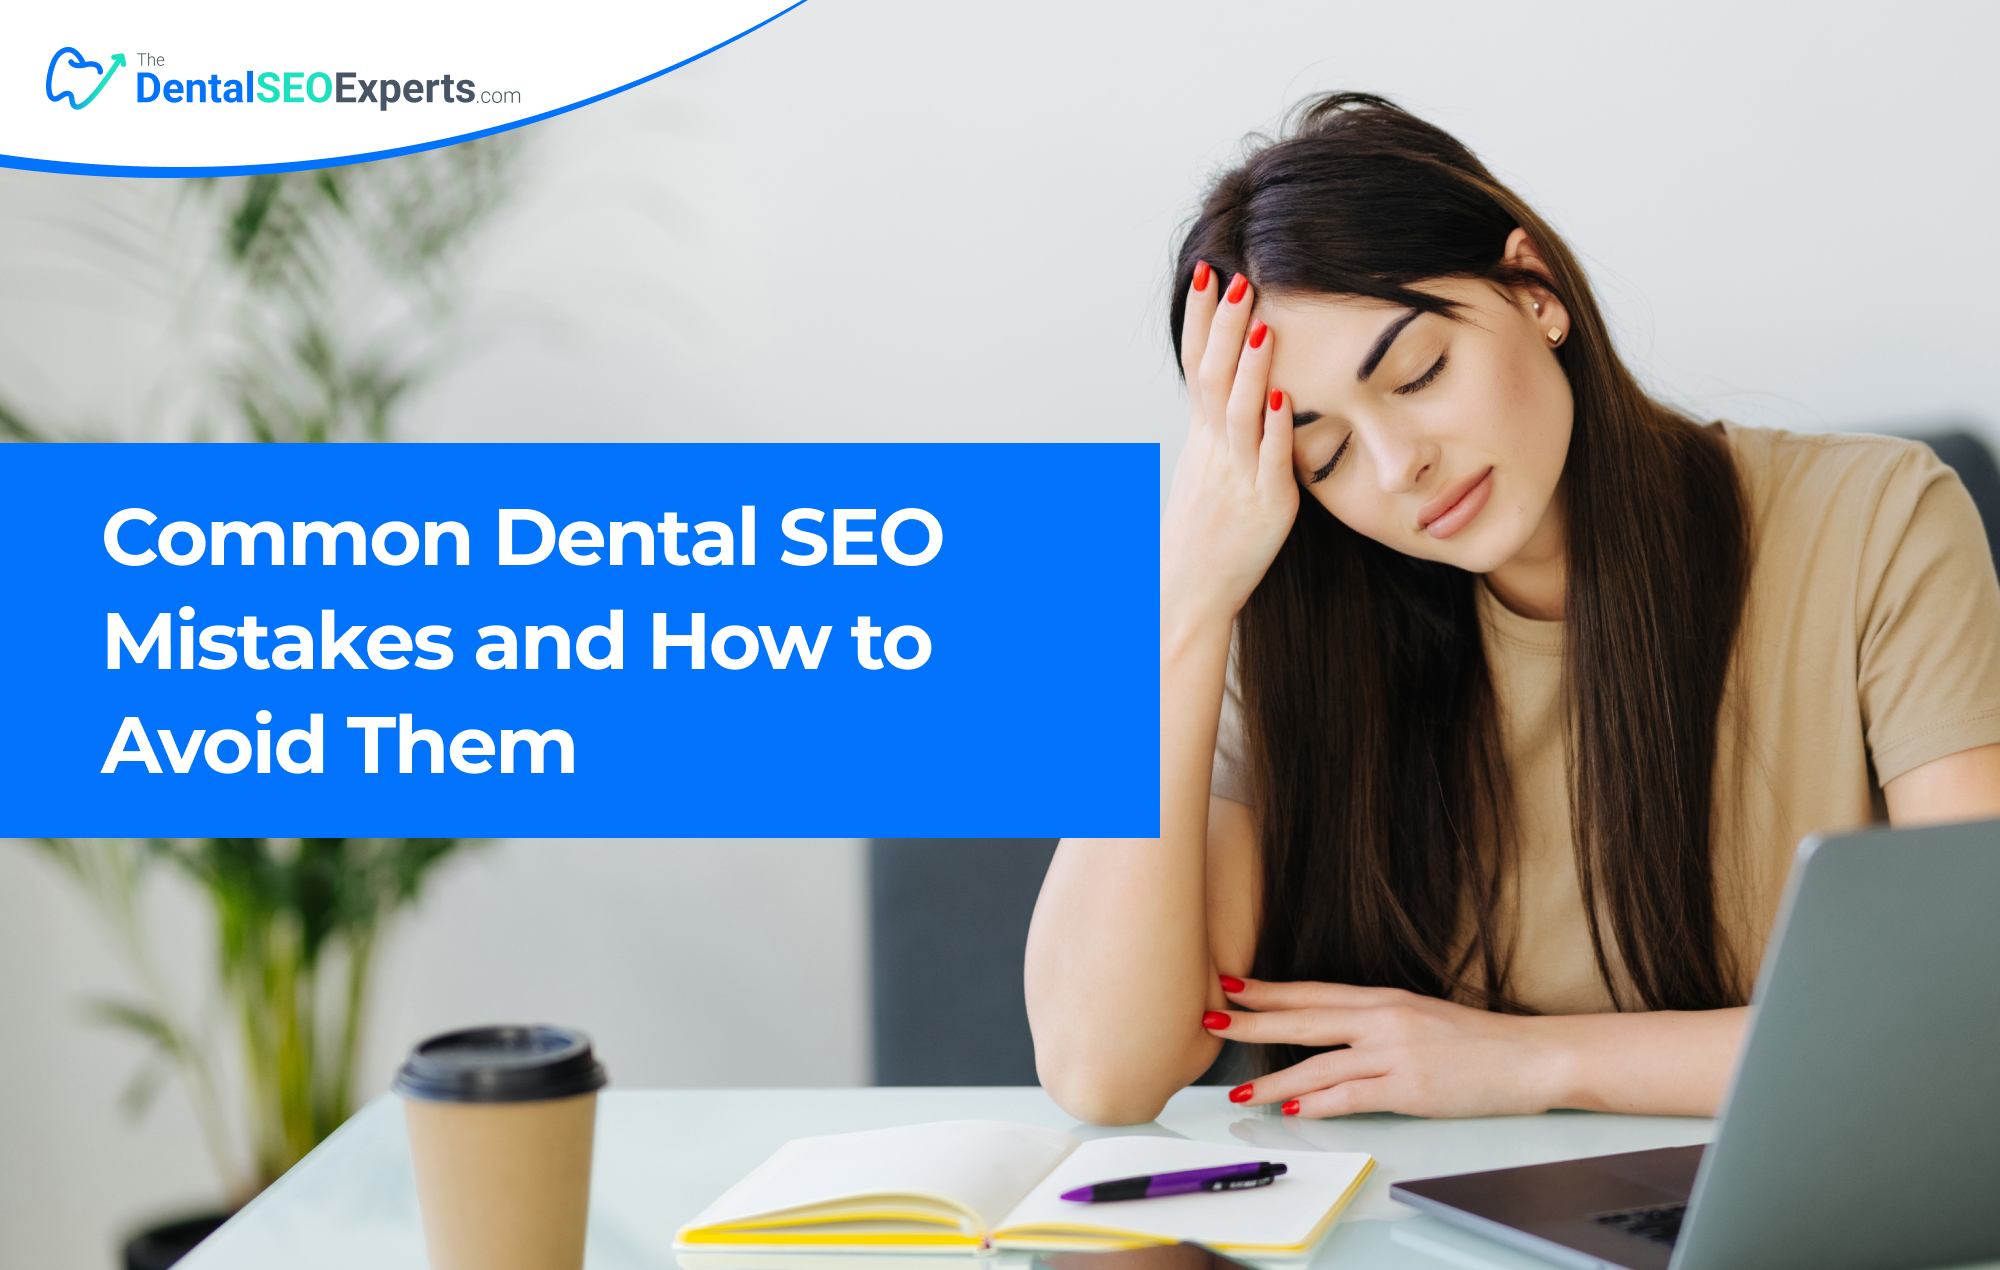 TheDentalSEOExperts - Common Dental SEO Mistakes and How to Avoid Them